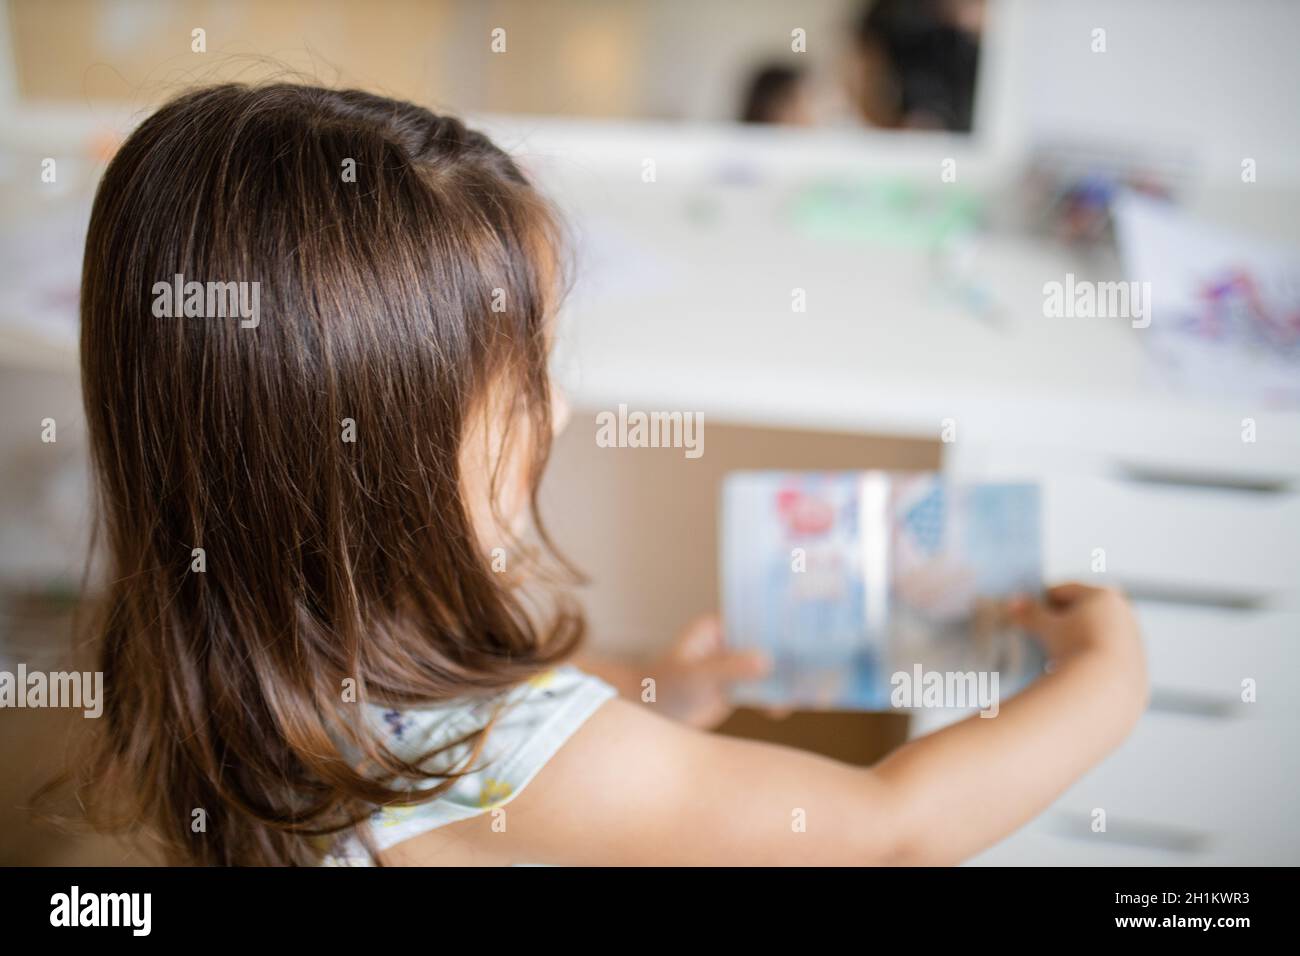 Picture over the shoulder of a little brunette girl looking at the colorful seals of an American passport, and with a blurry mirror and a desk full of Stock Photo